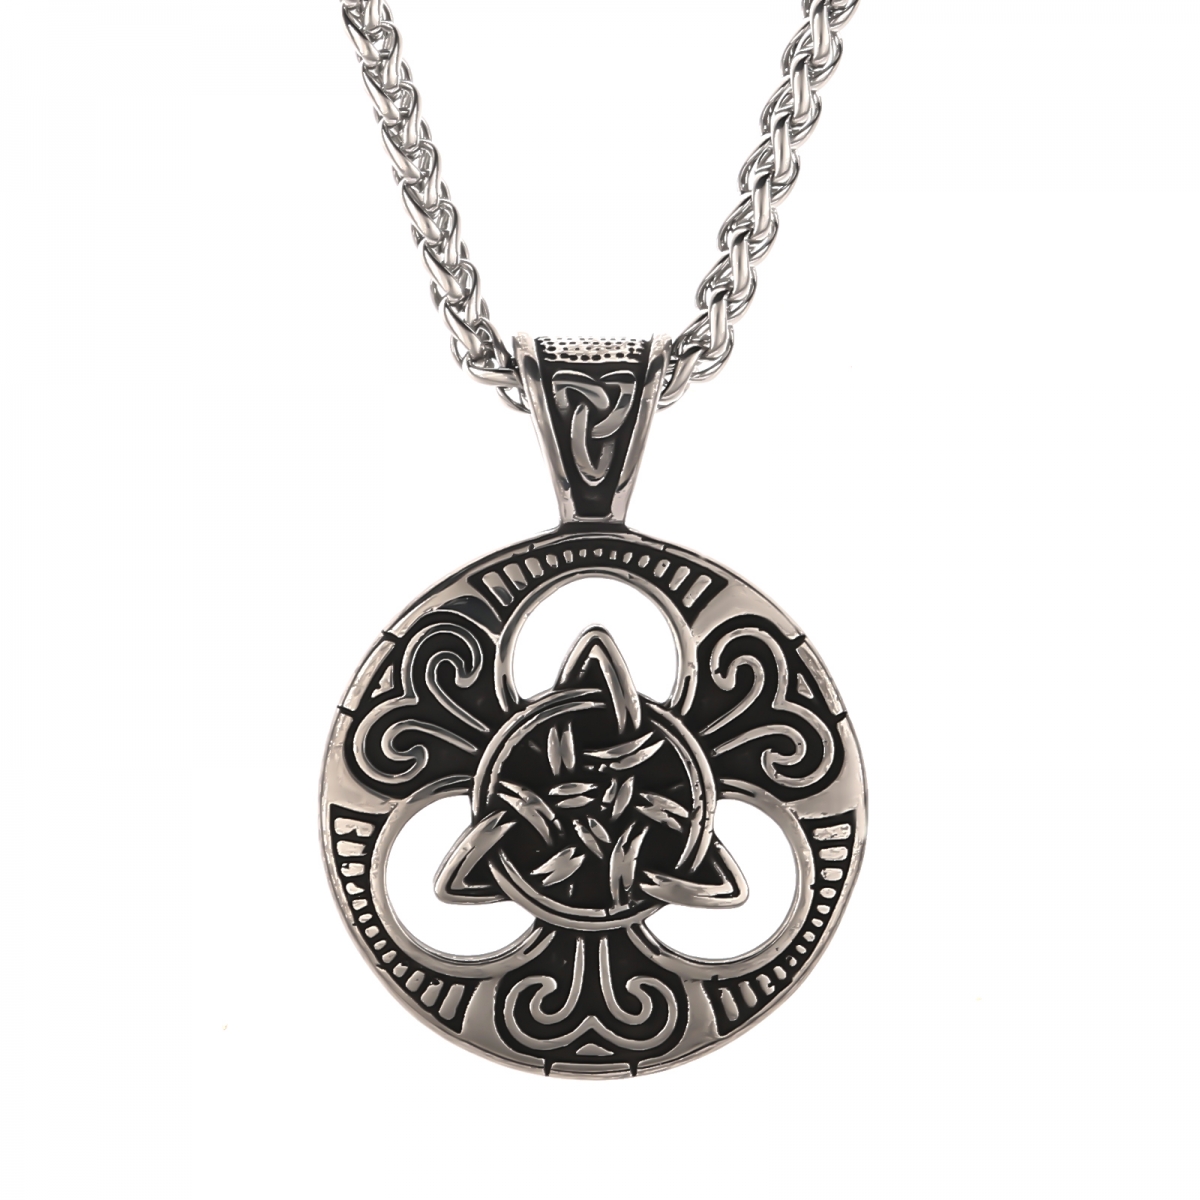 Triquetra Necklace US$2.9/PC-NORSECOLLECTION- Viking Jewelry,Viking Necklace,Viking Bracelet,Viking Rings,Viking Mugs,Viking Accessories,Viking Crafts